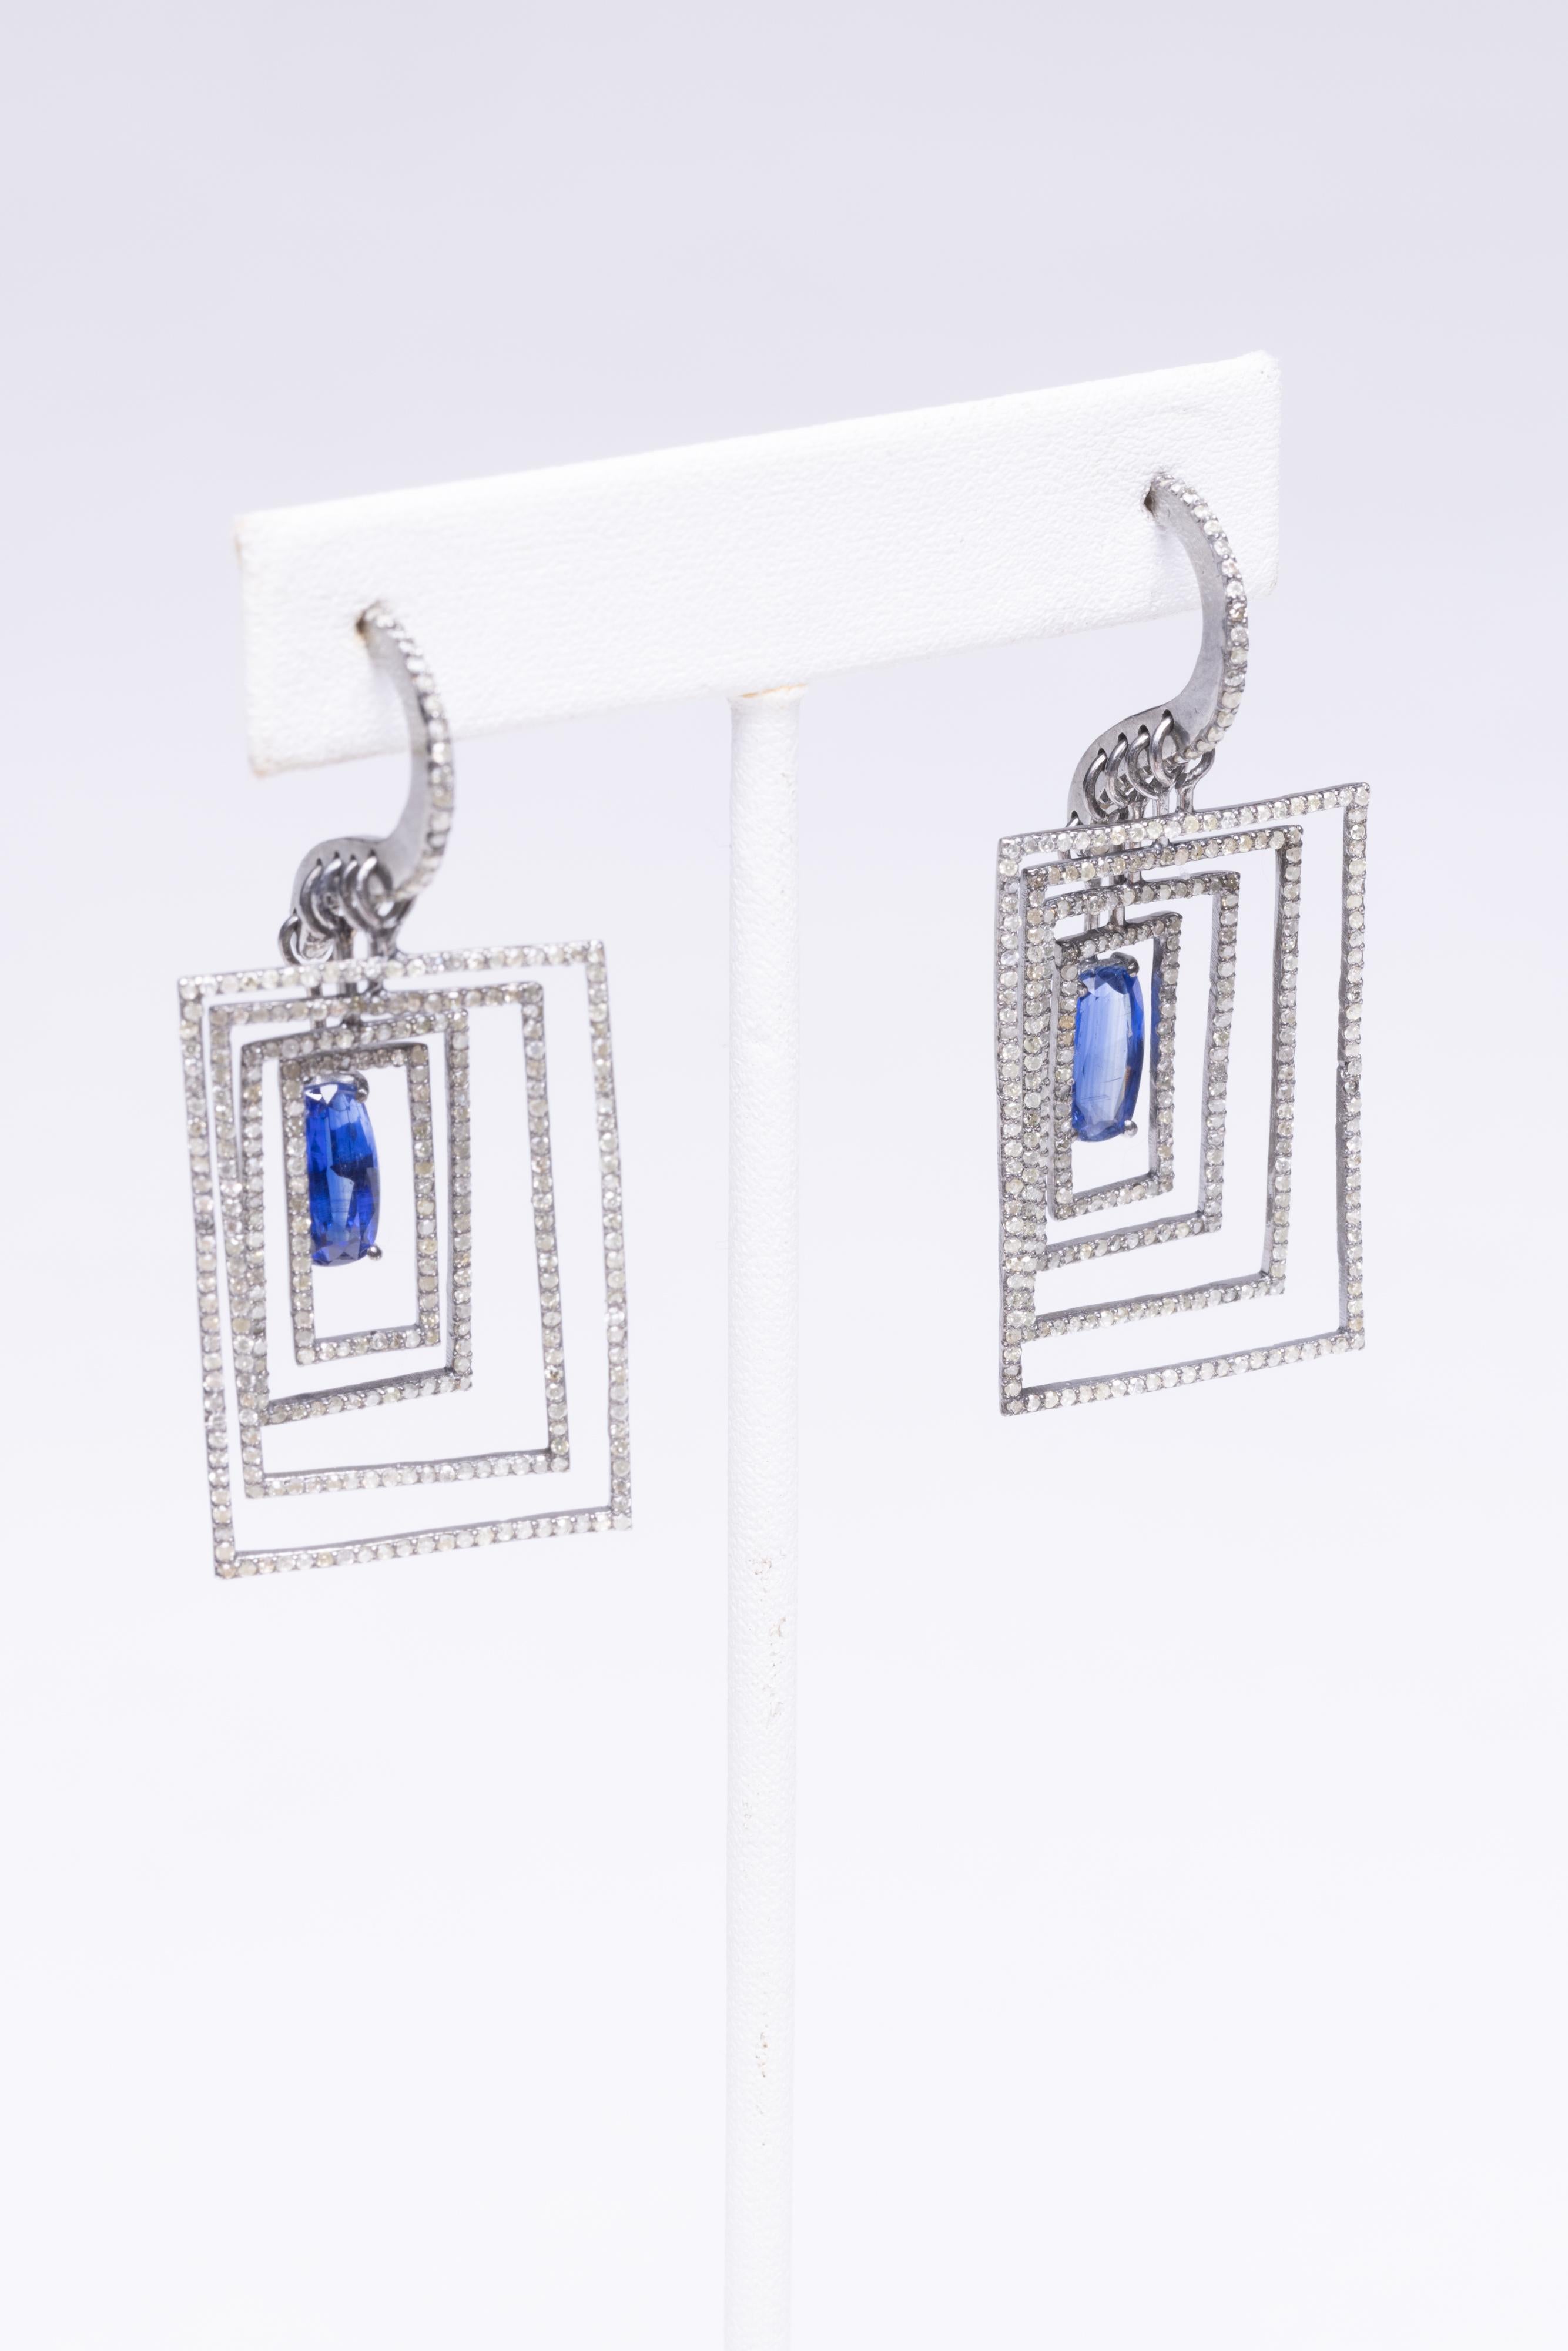 A very unusual pair of dimensional earrings.  A picture frame within a frame, within a frame, etc, and slightly recessed each time.  Oval faceted kyanite at the center of the smallest frame has pave` set, round brilliant cut diamonds. set in